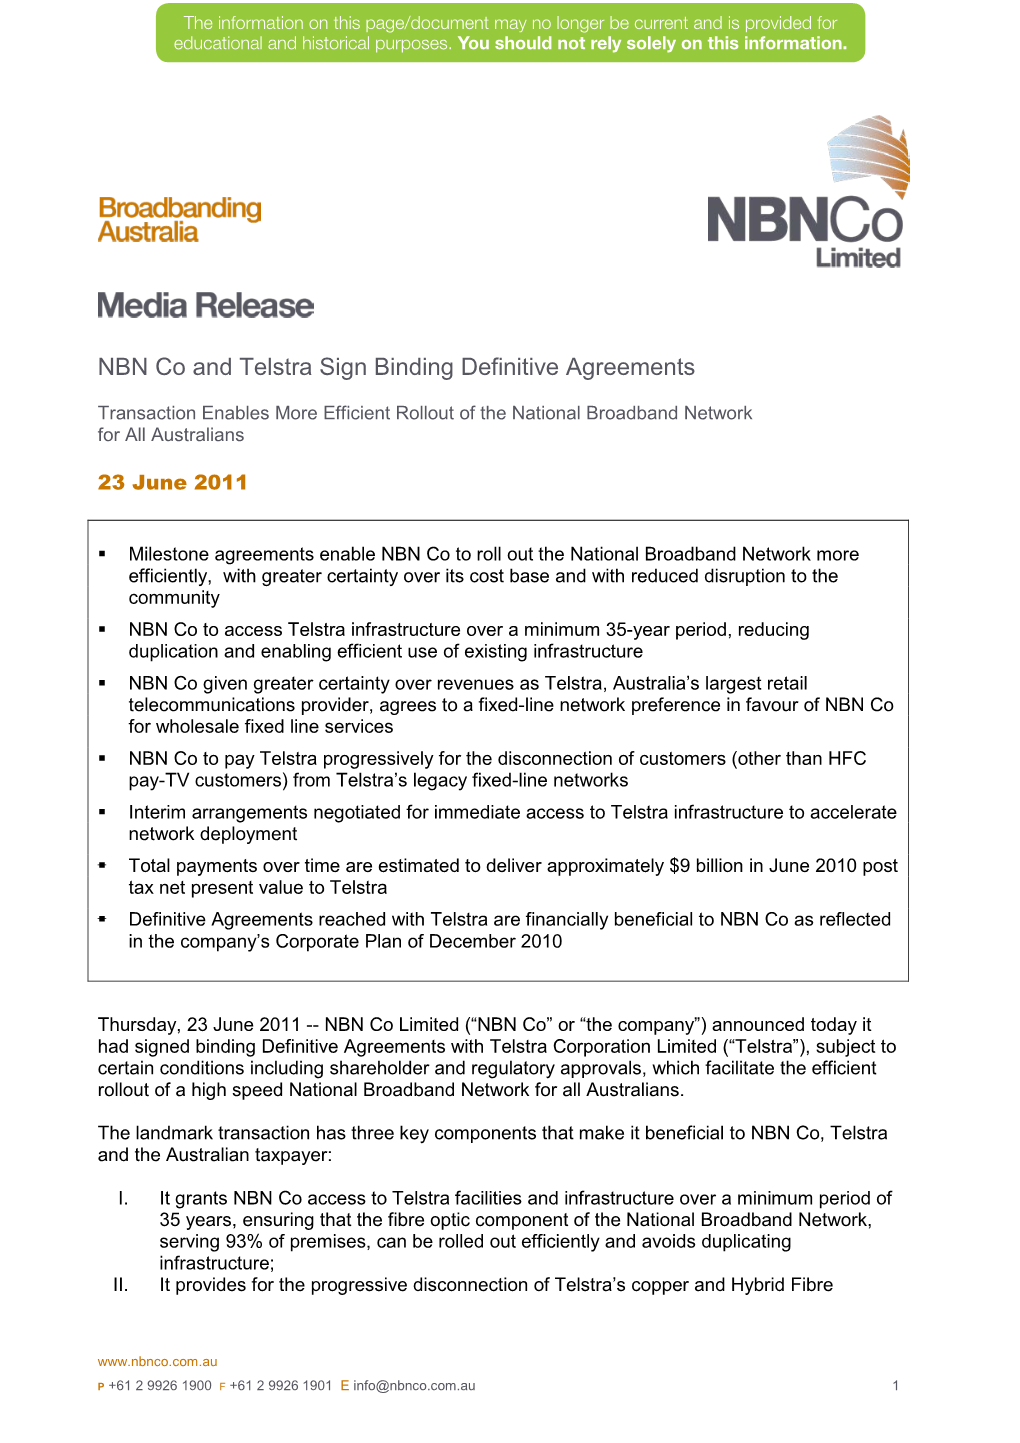 NBN Co and Telstra Sign Binding Definitive Agreements